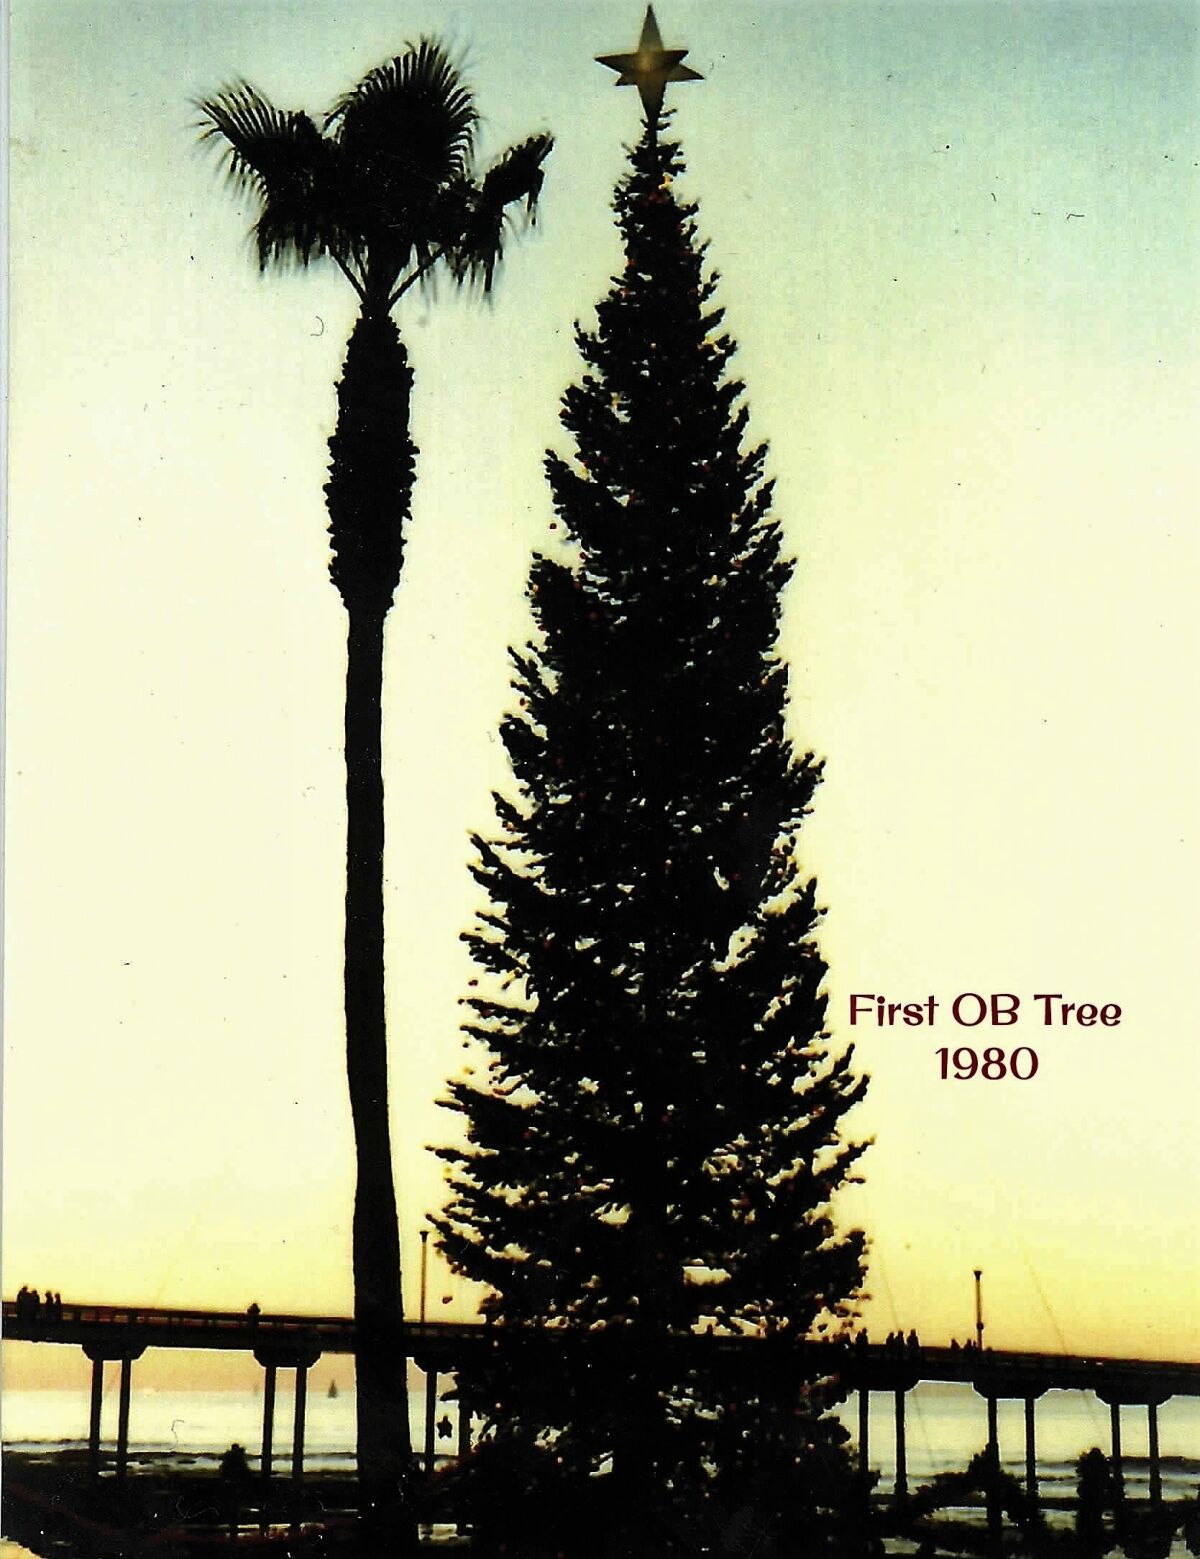 The Ocean Beach holiday tree in 1980 was straight and 60 feet tall.